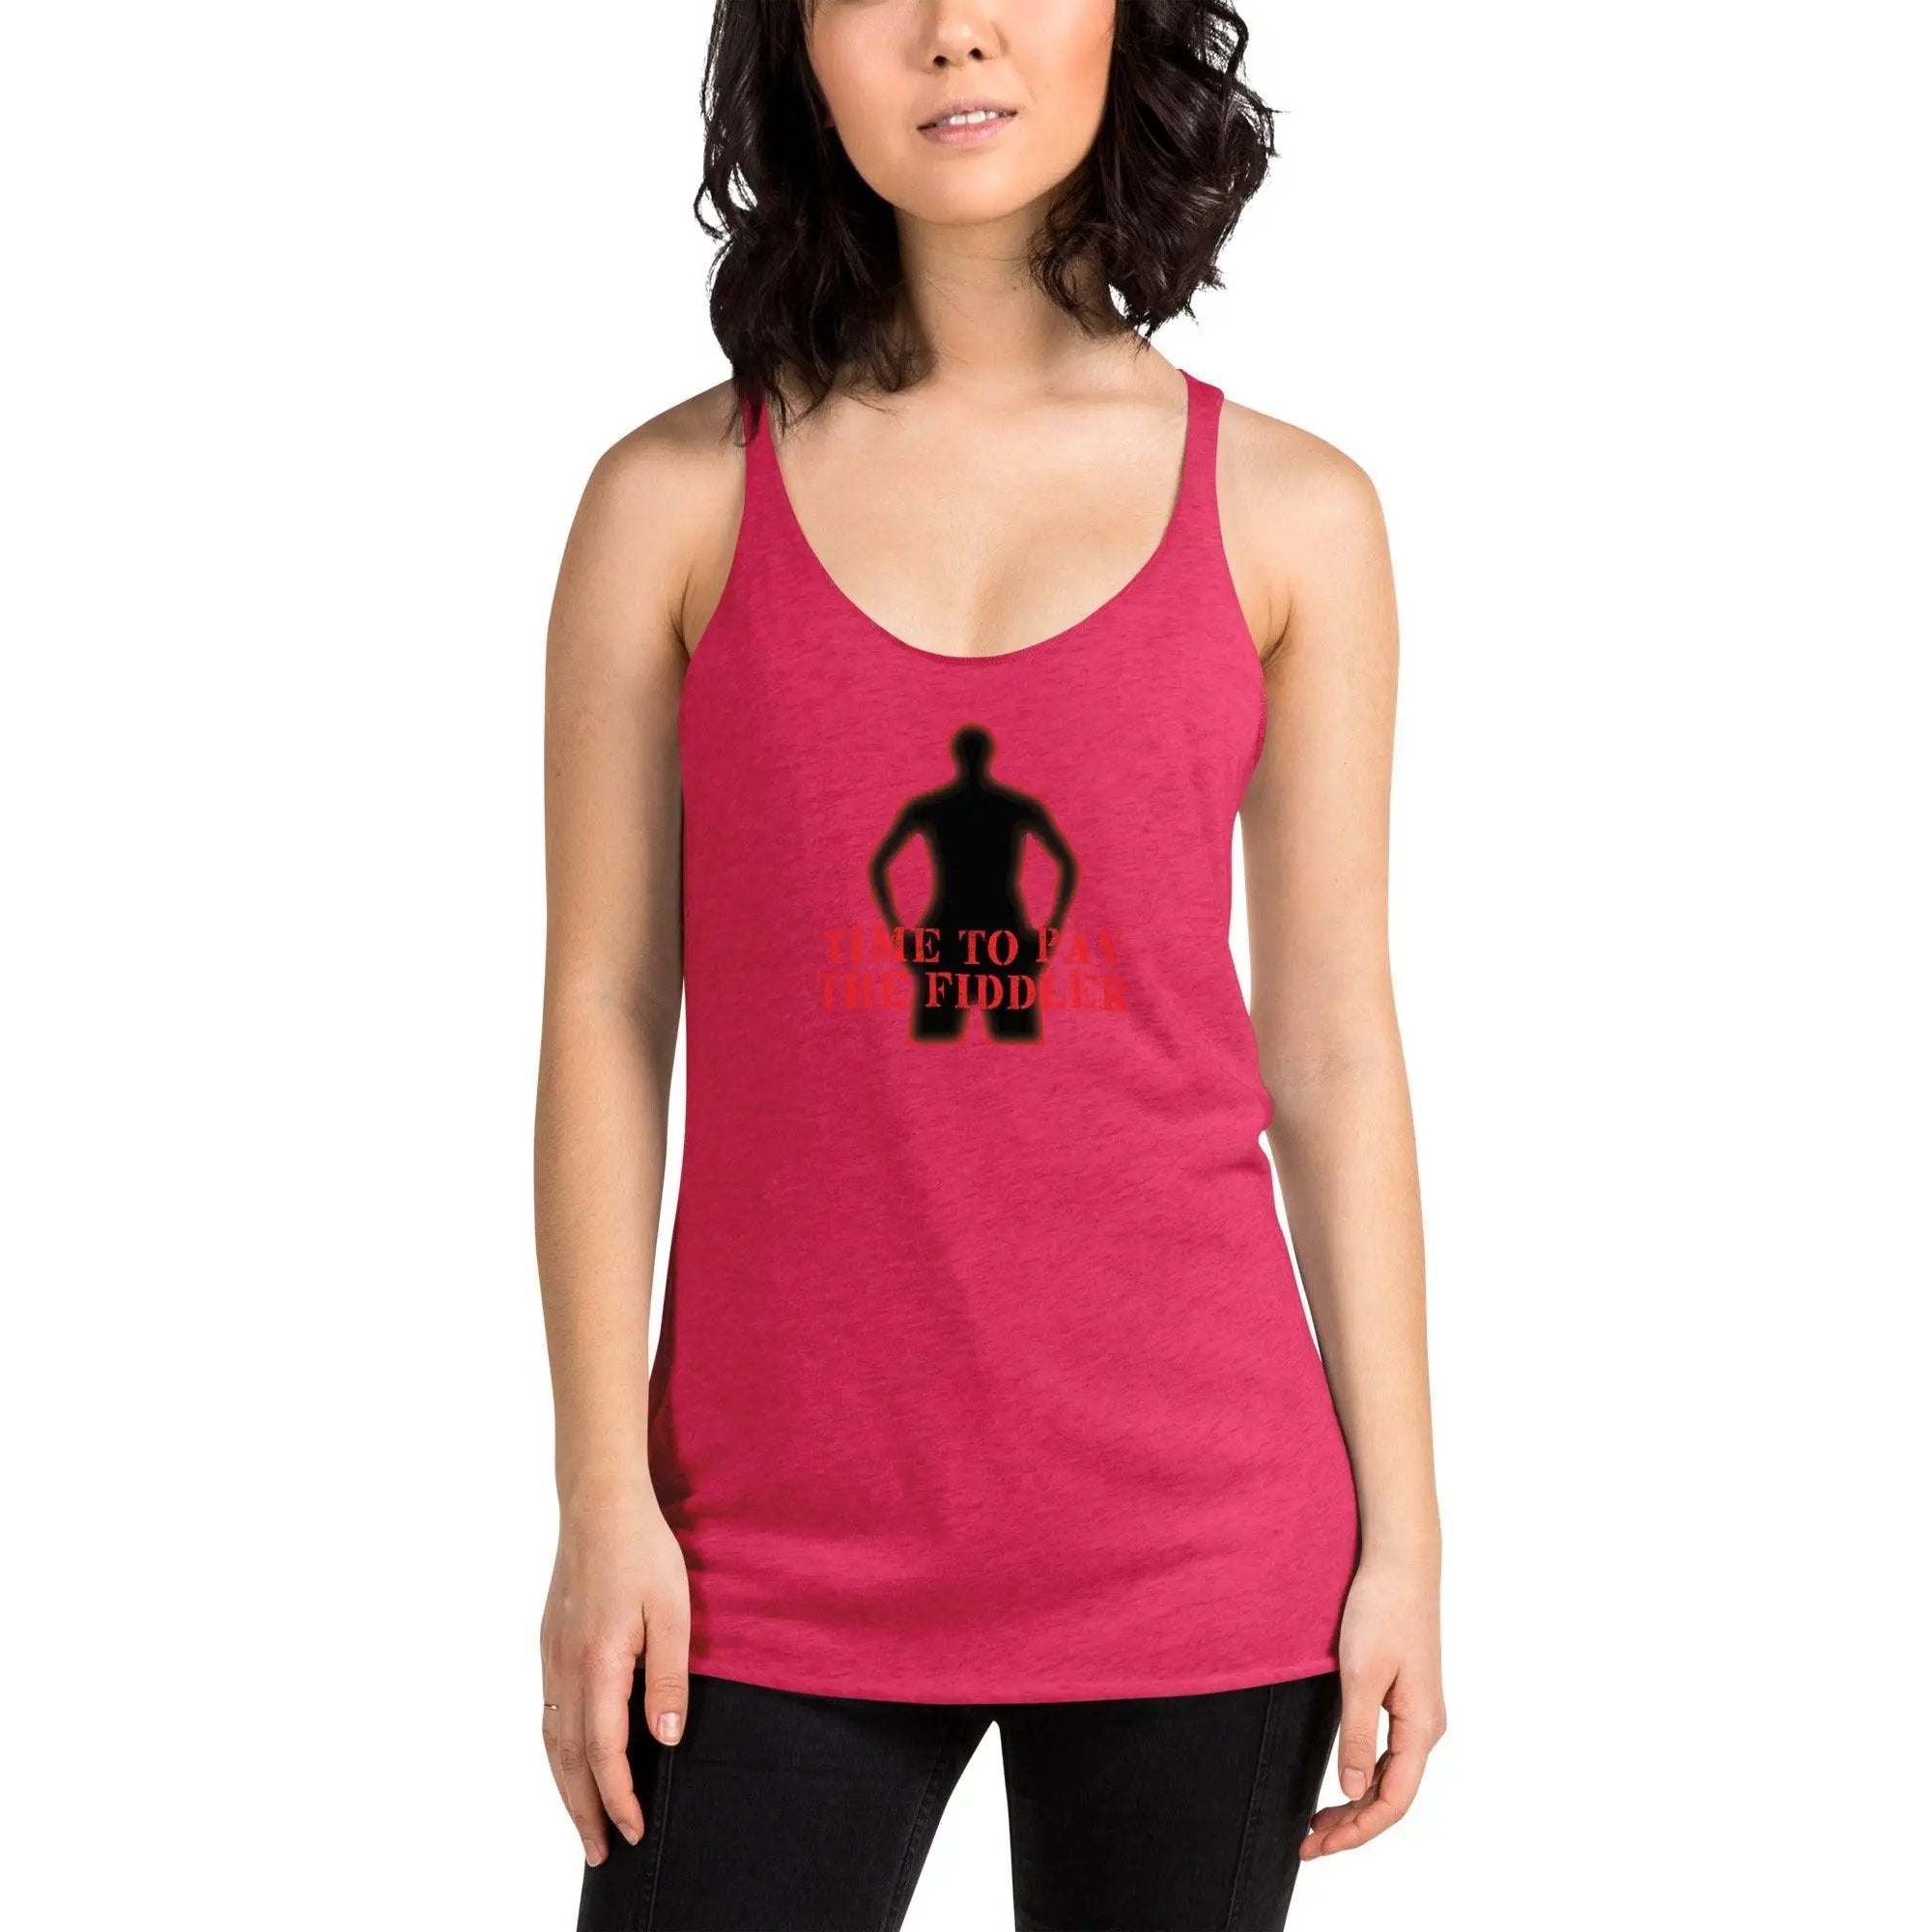 Time To Pay The Fiddler Women's Racerback Tank